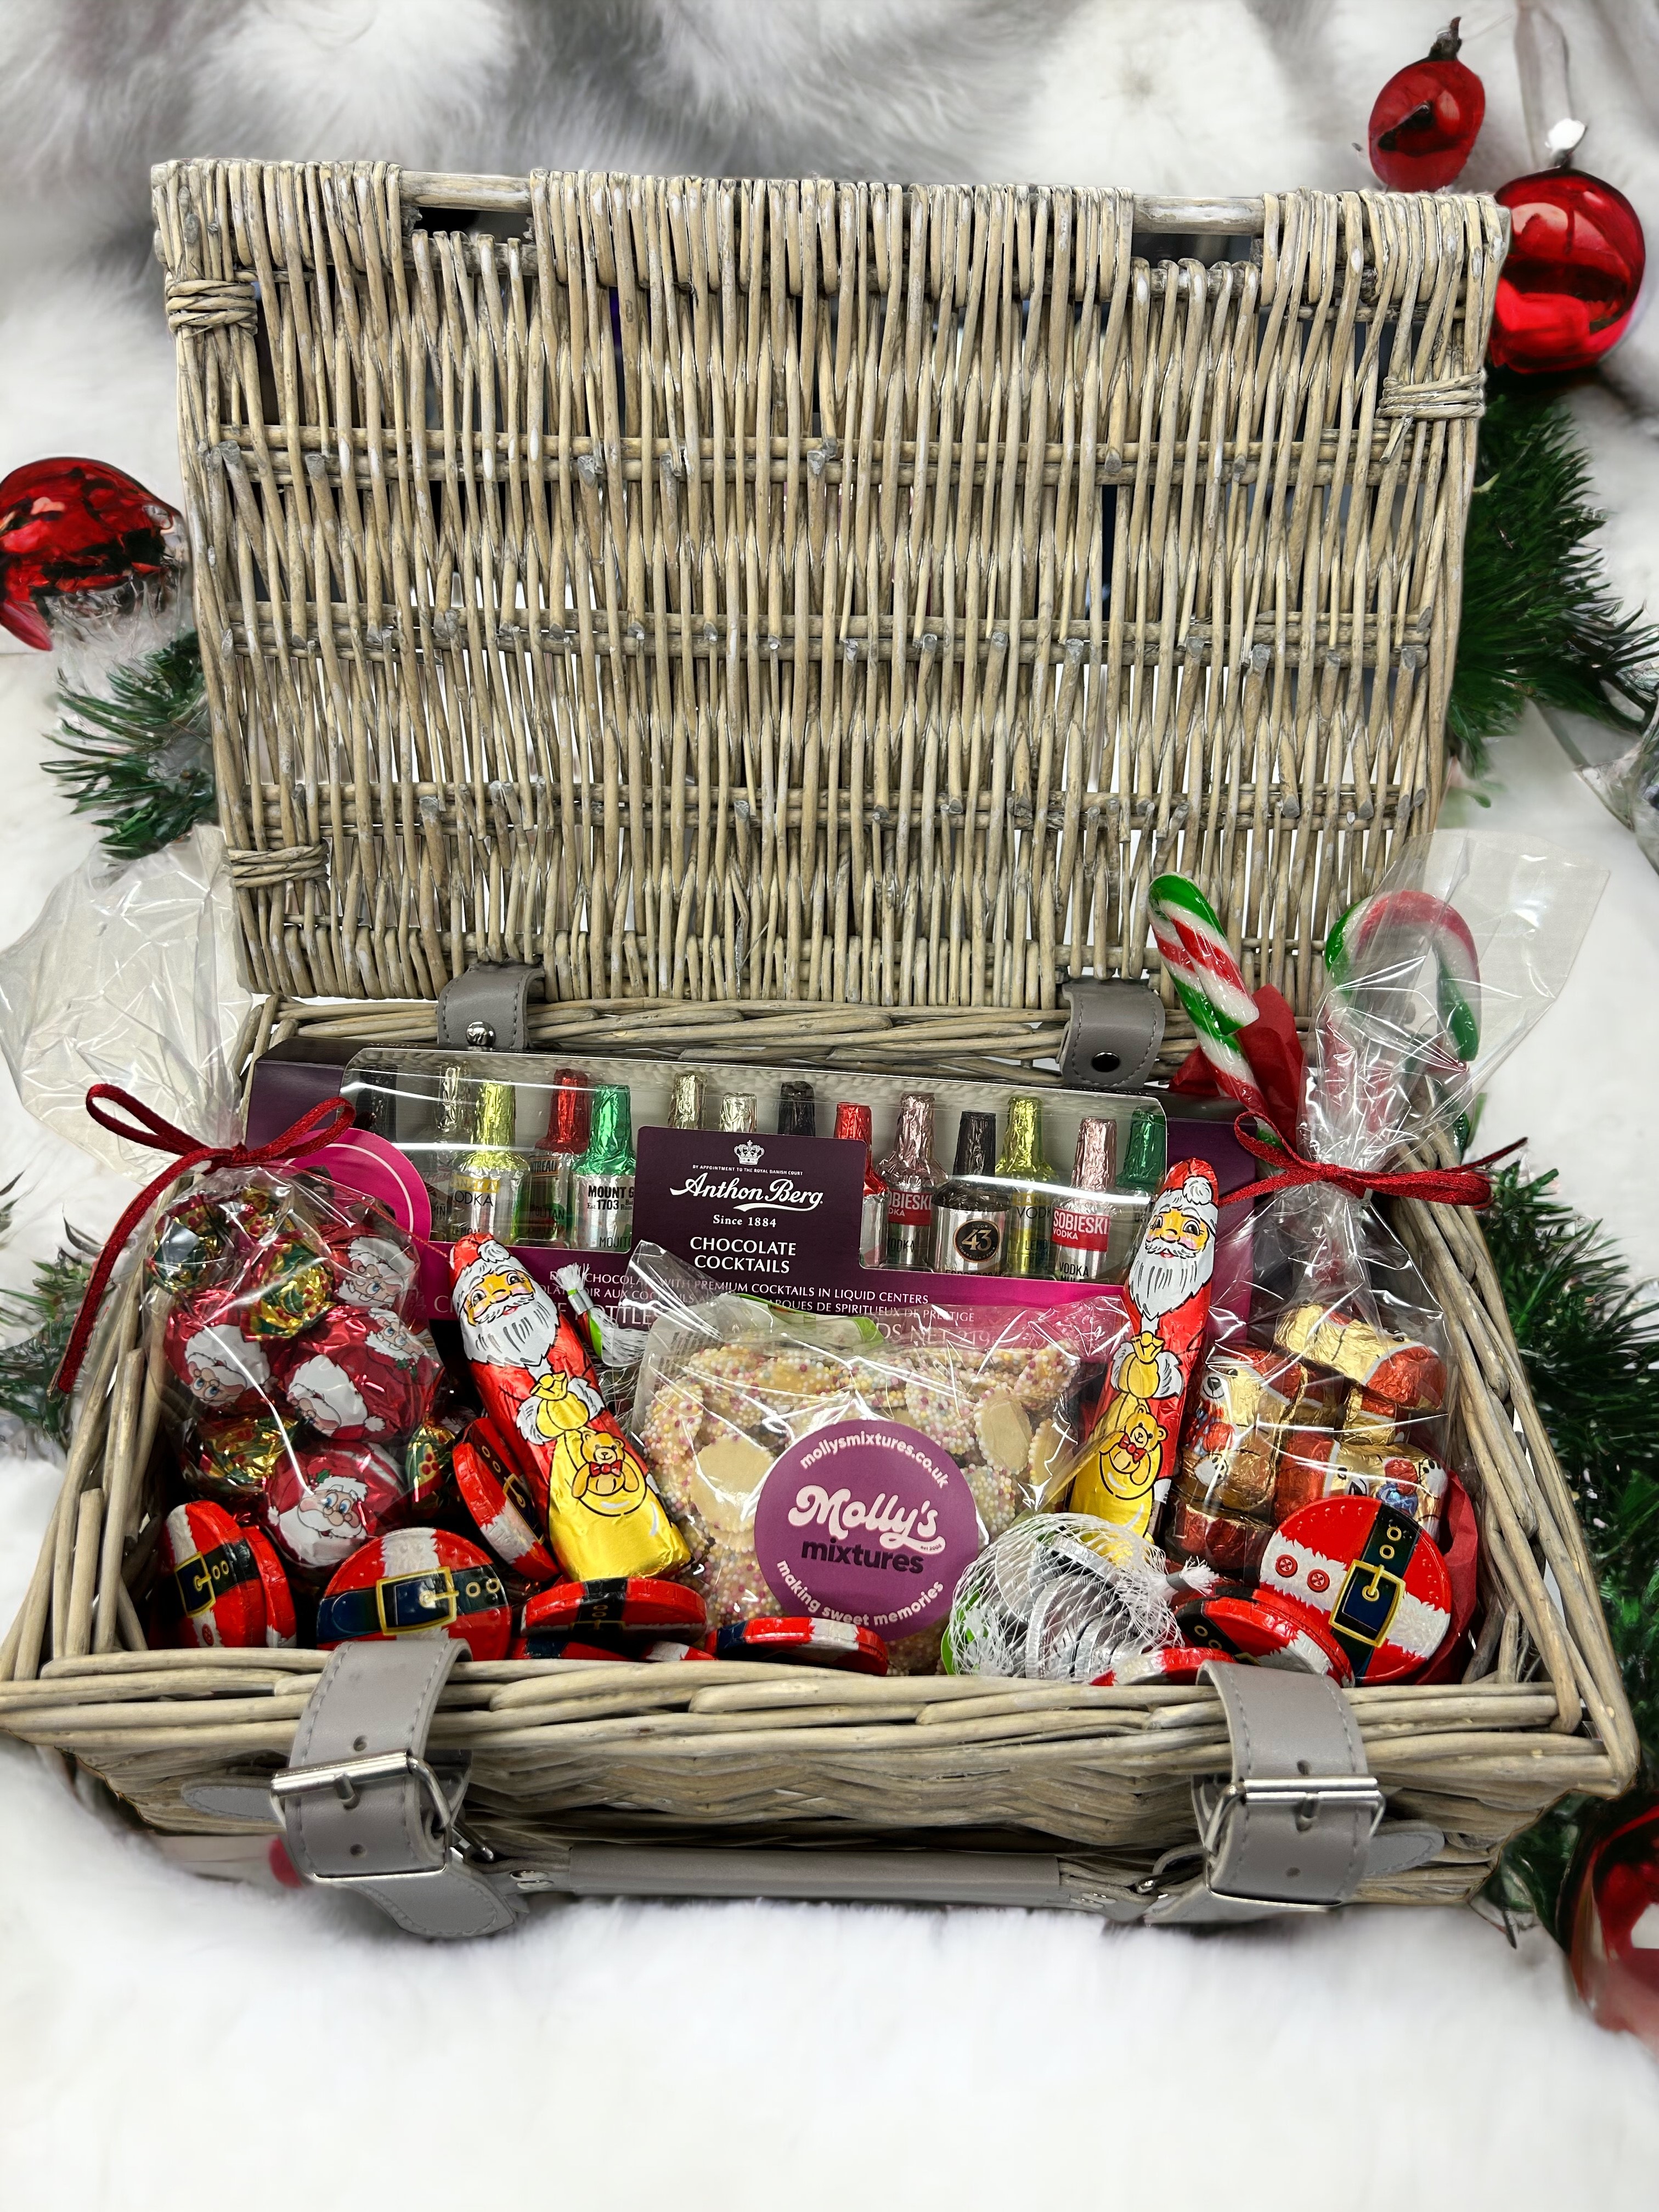 Molly's Mixtures Christmas Hampers